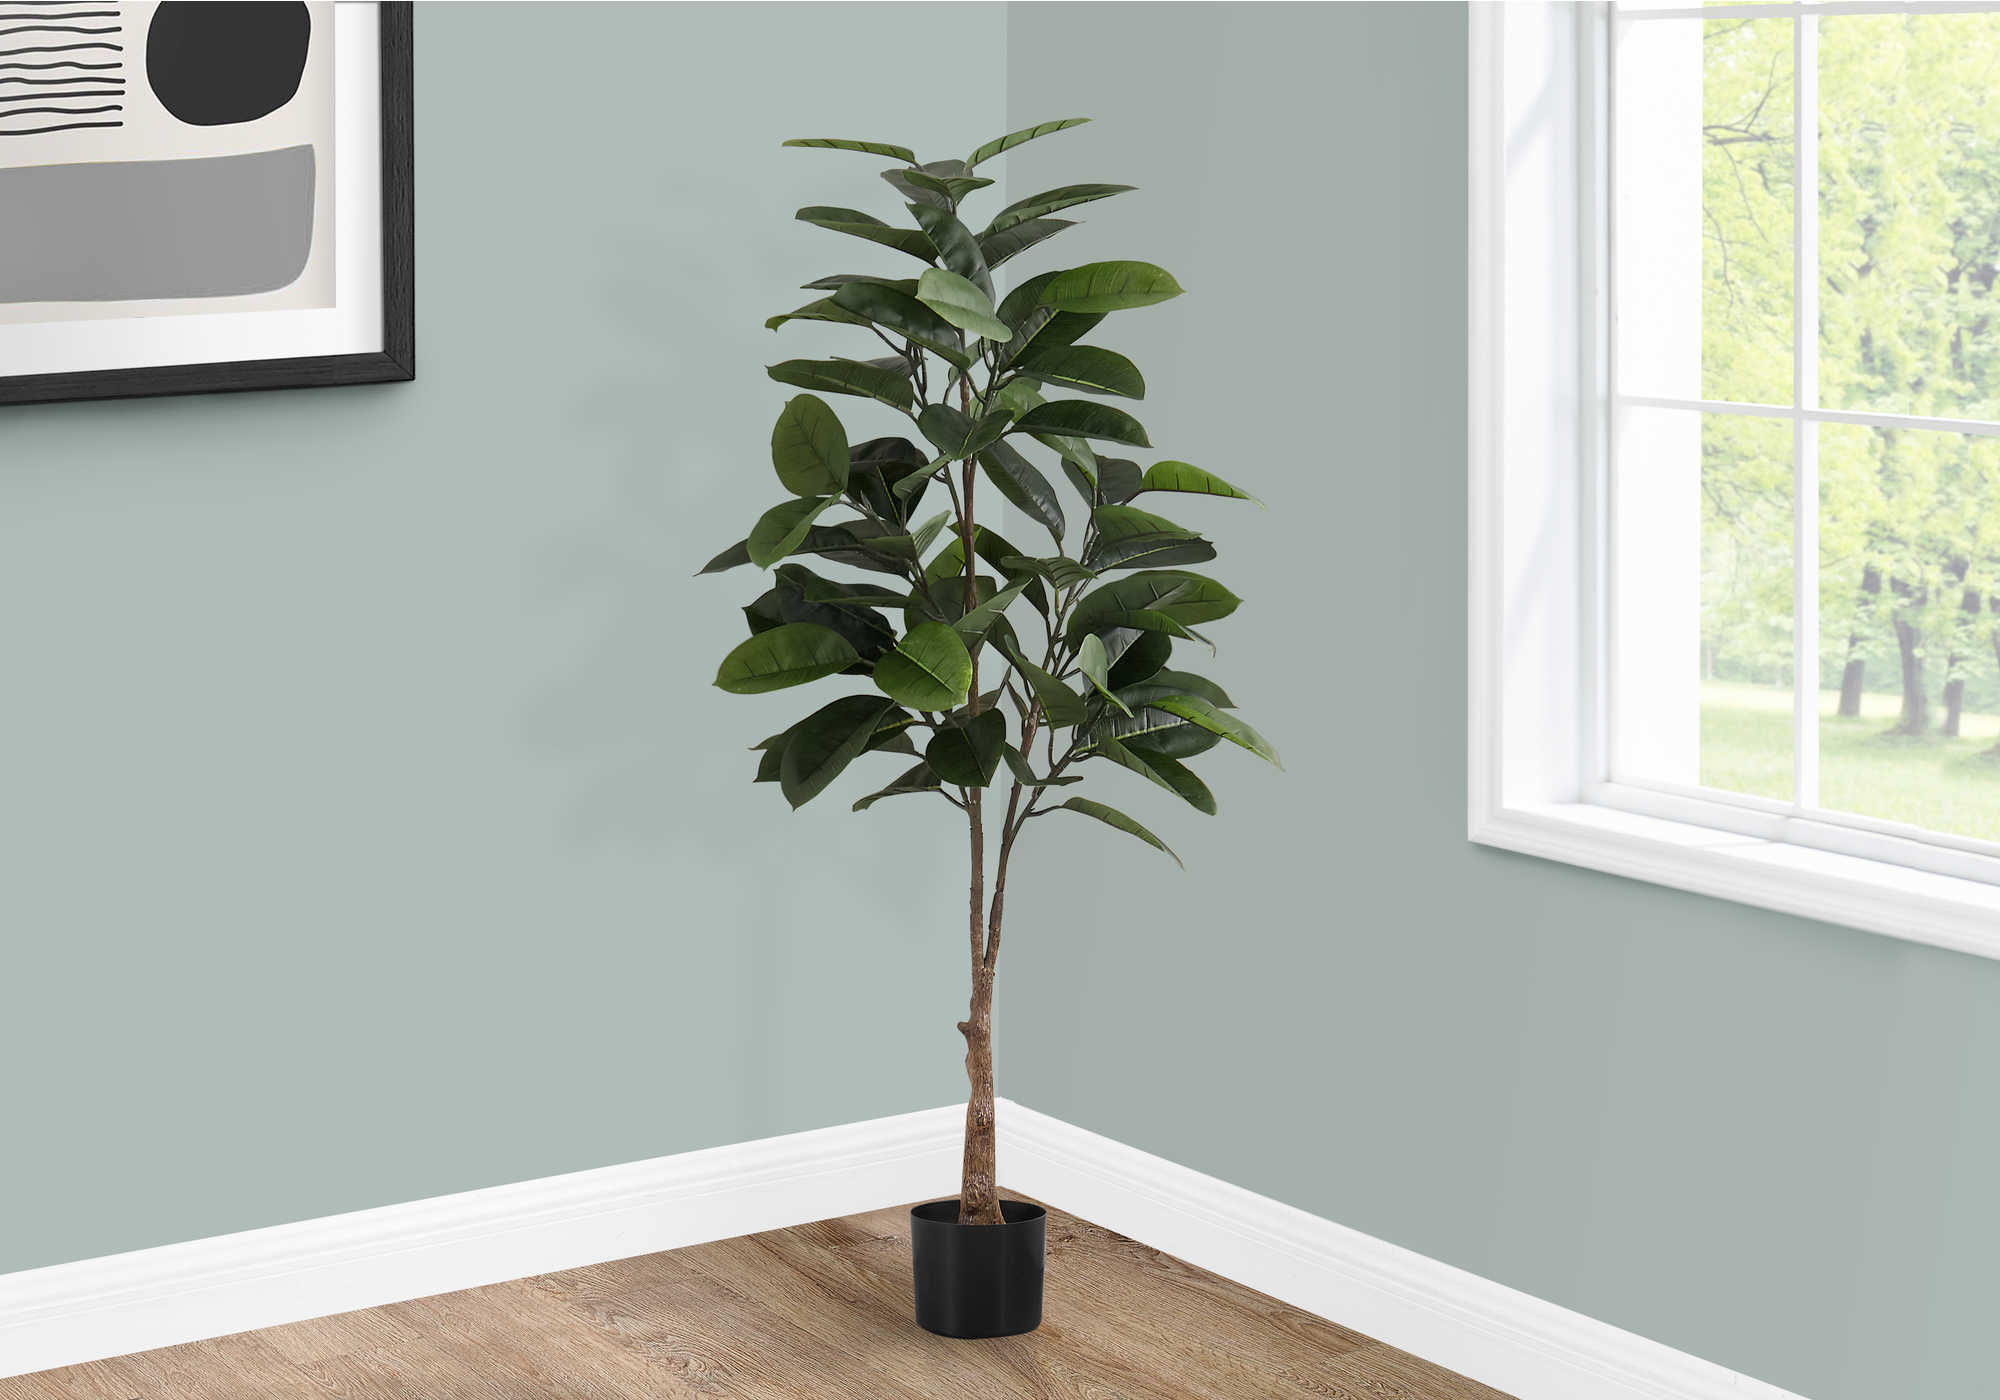 ARTIFICIAL PLANT - 52"H / INDOOR RUBBER TREE IN A 5" POT